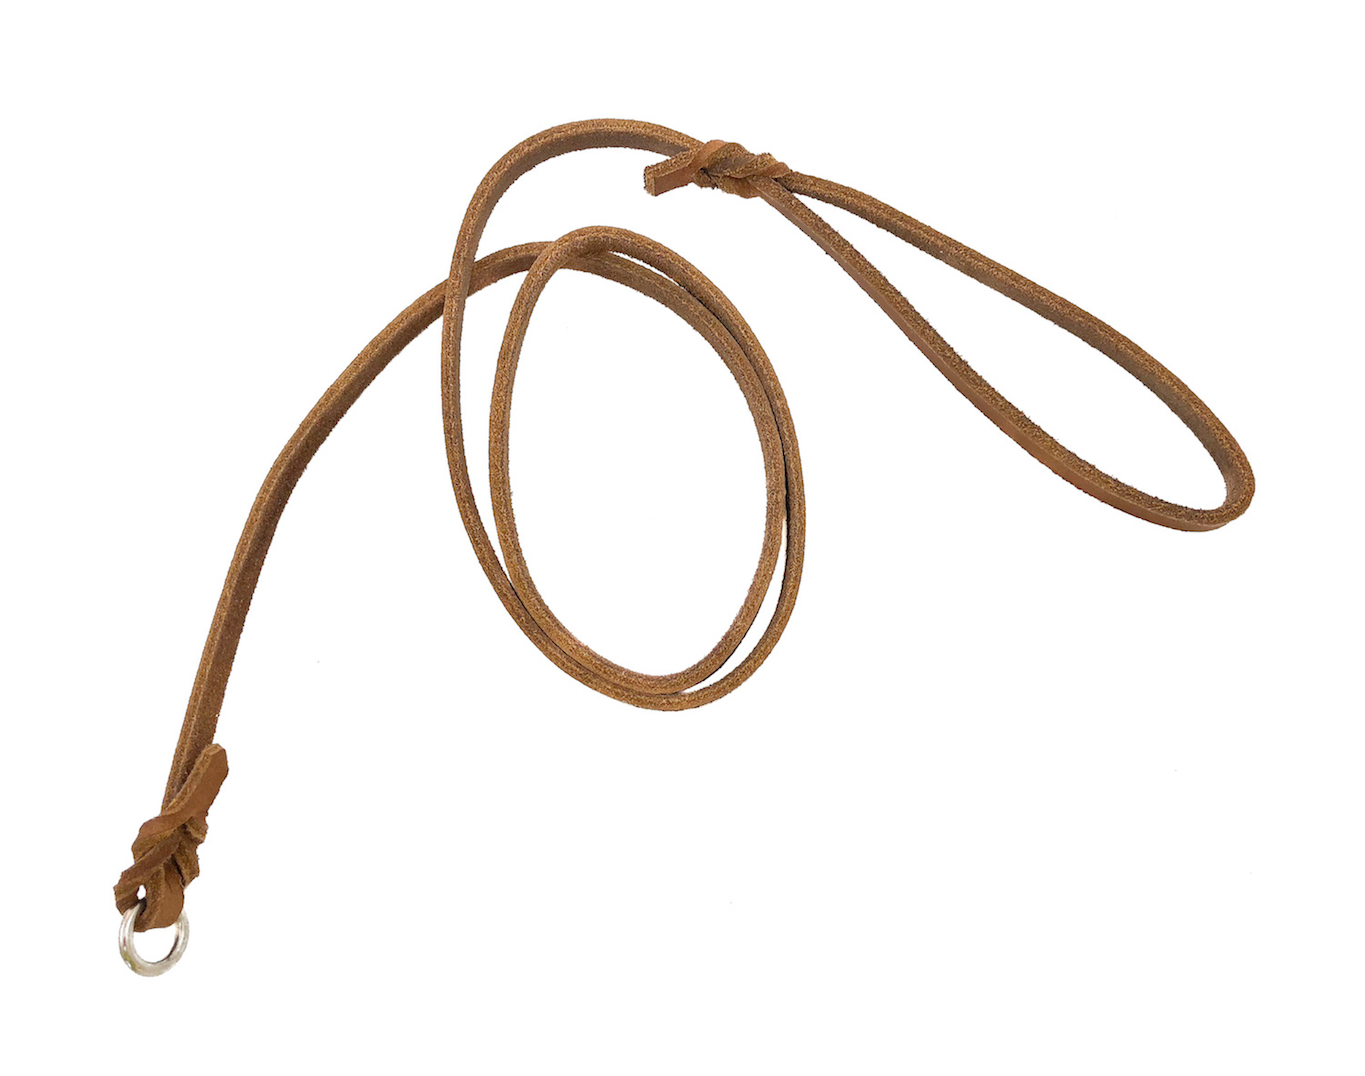  White Pine Leather Show Slip Lead 36” in Chestnut. 